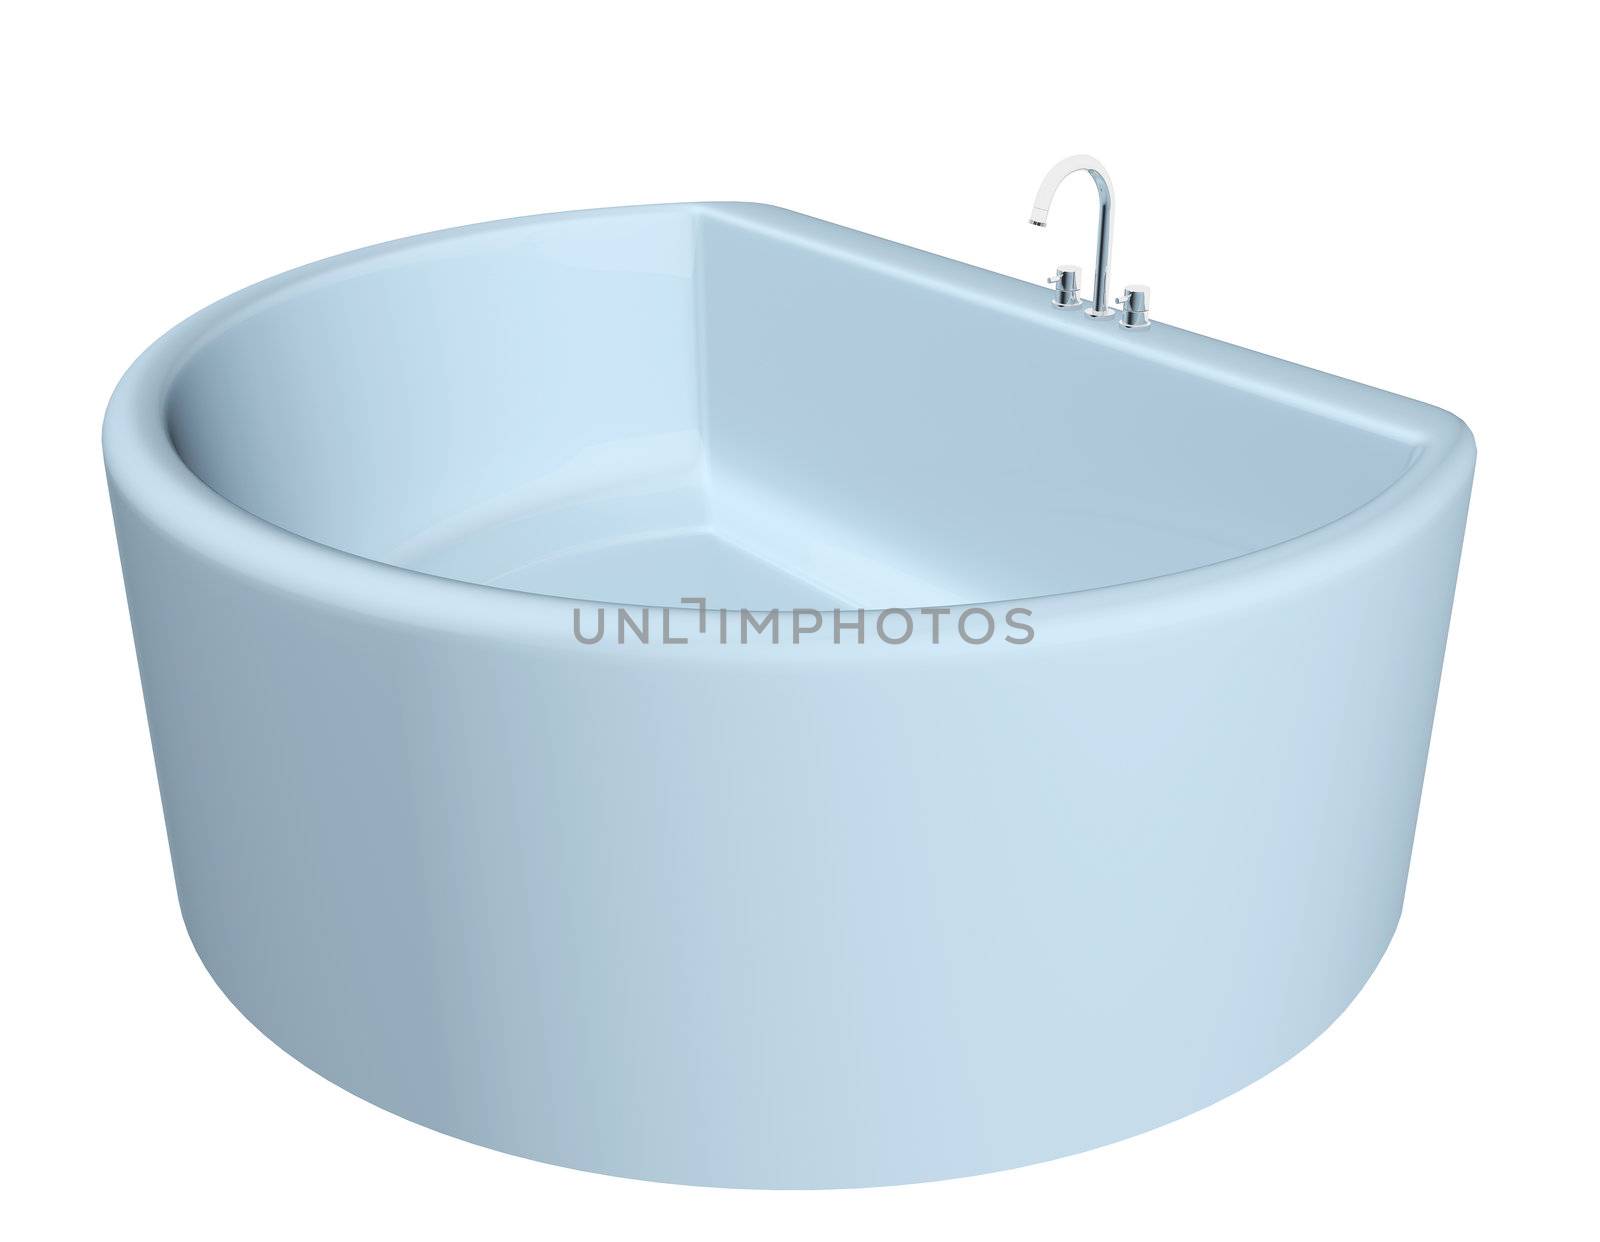 White semi-circular modern bathtub with stainless steel fixtures, isolated against a white background